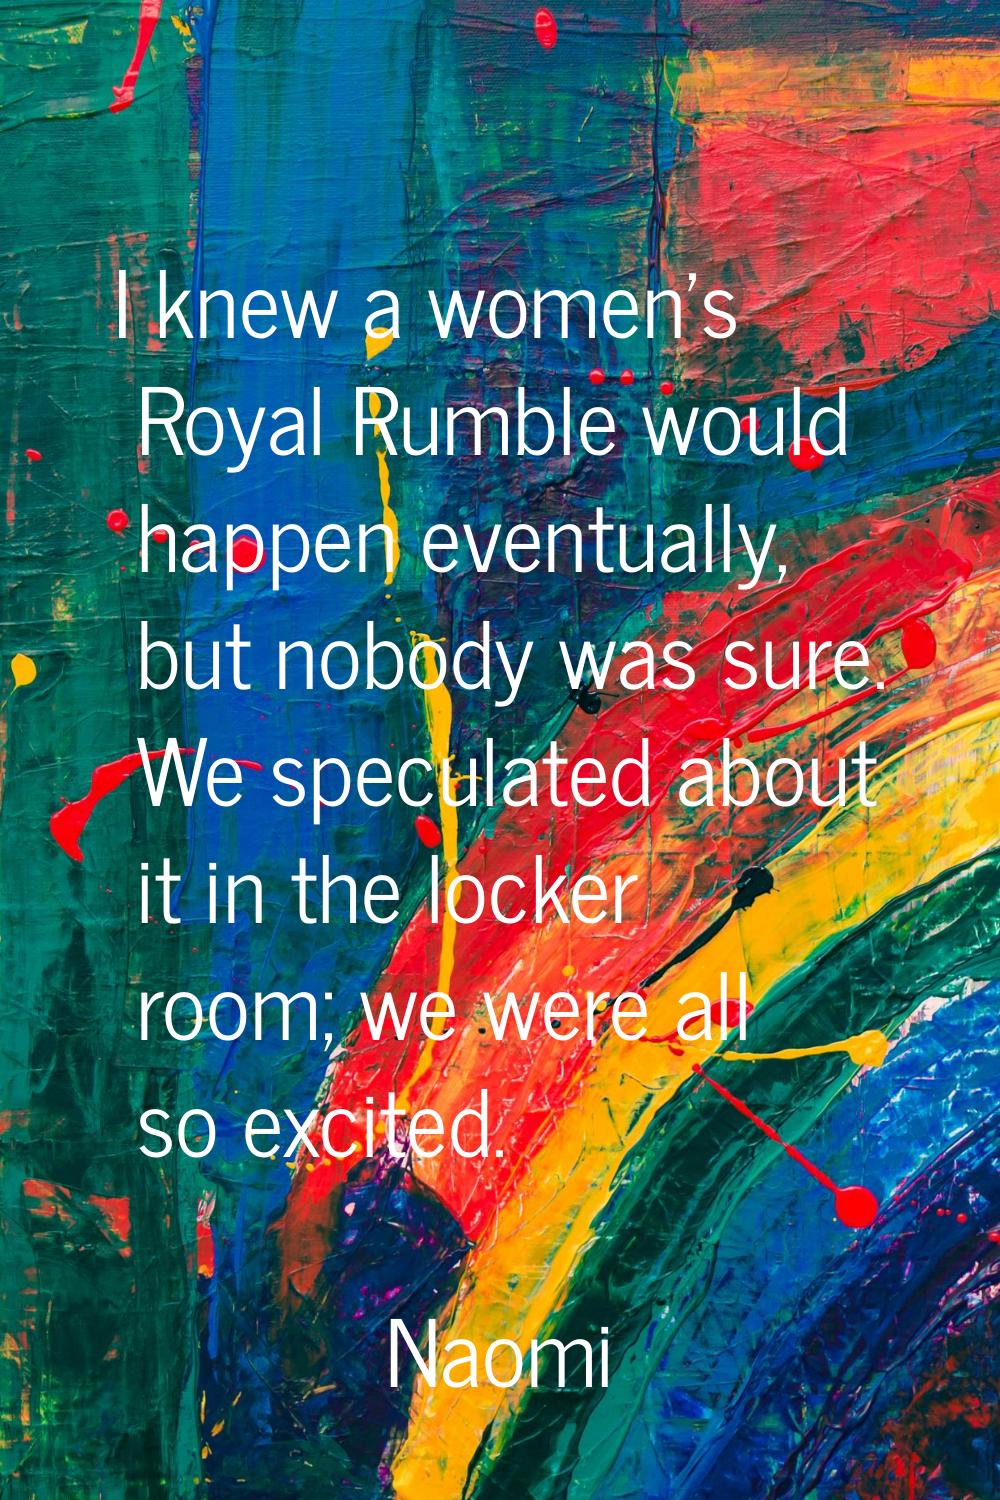 I knew a women's Royal Rumble would happen eventually, but nobody was sure. We speculated about it 